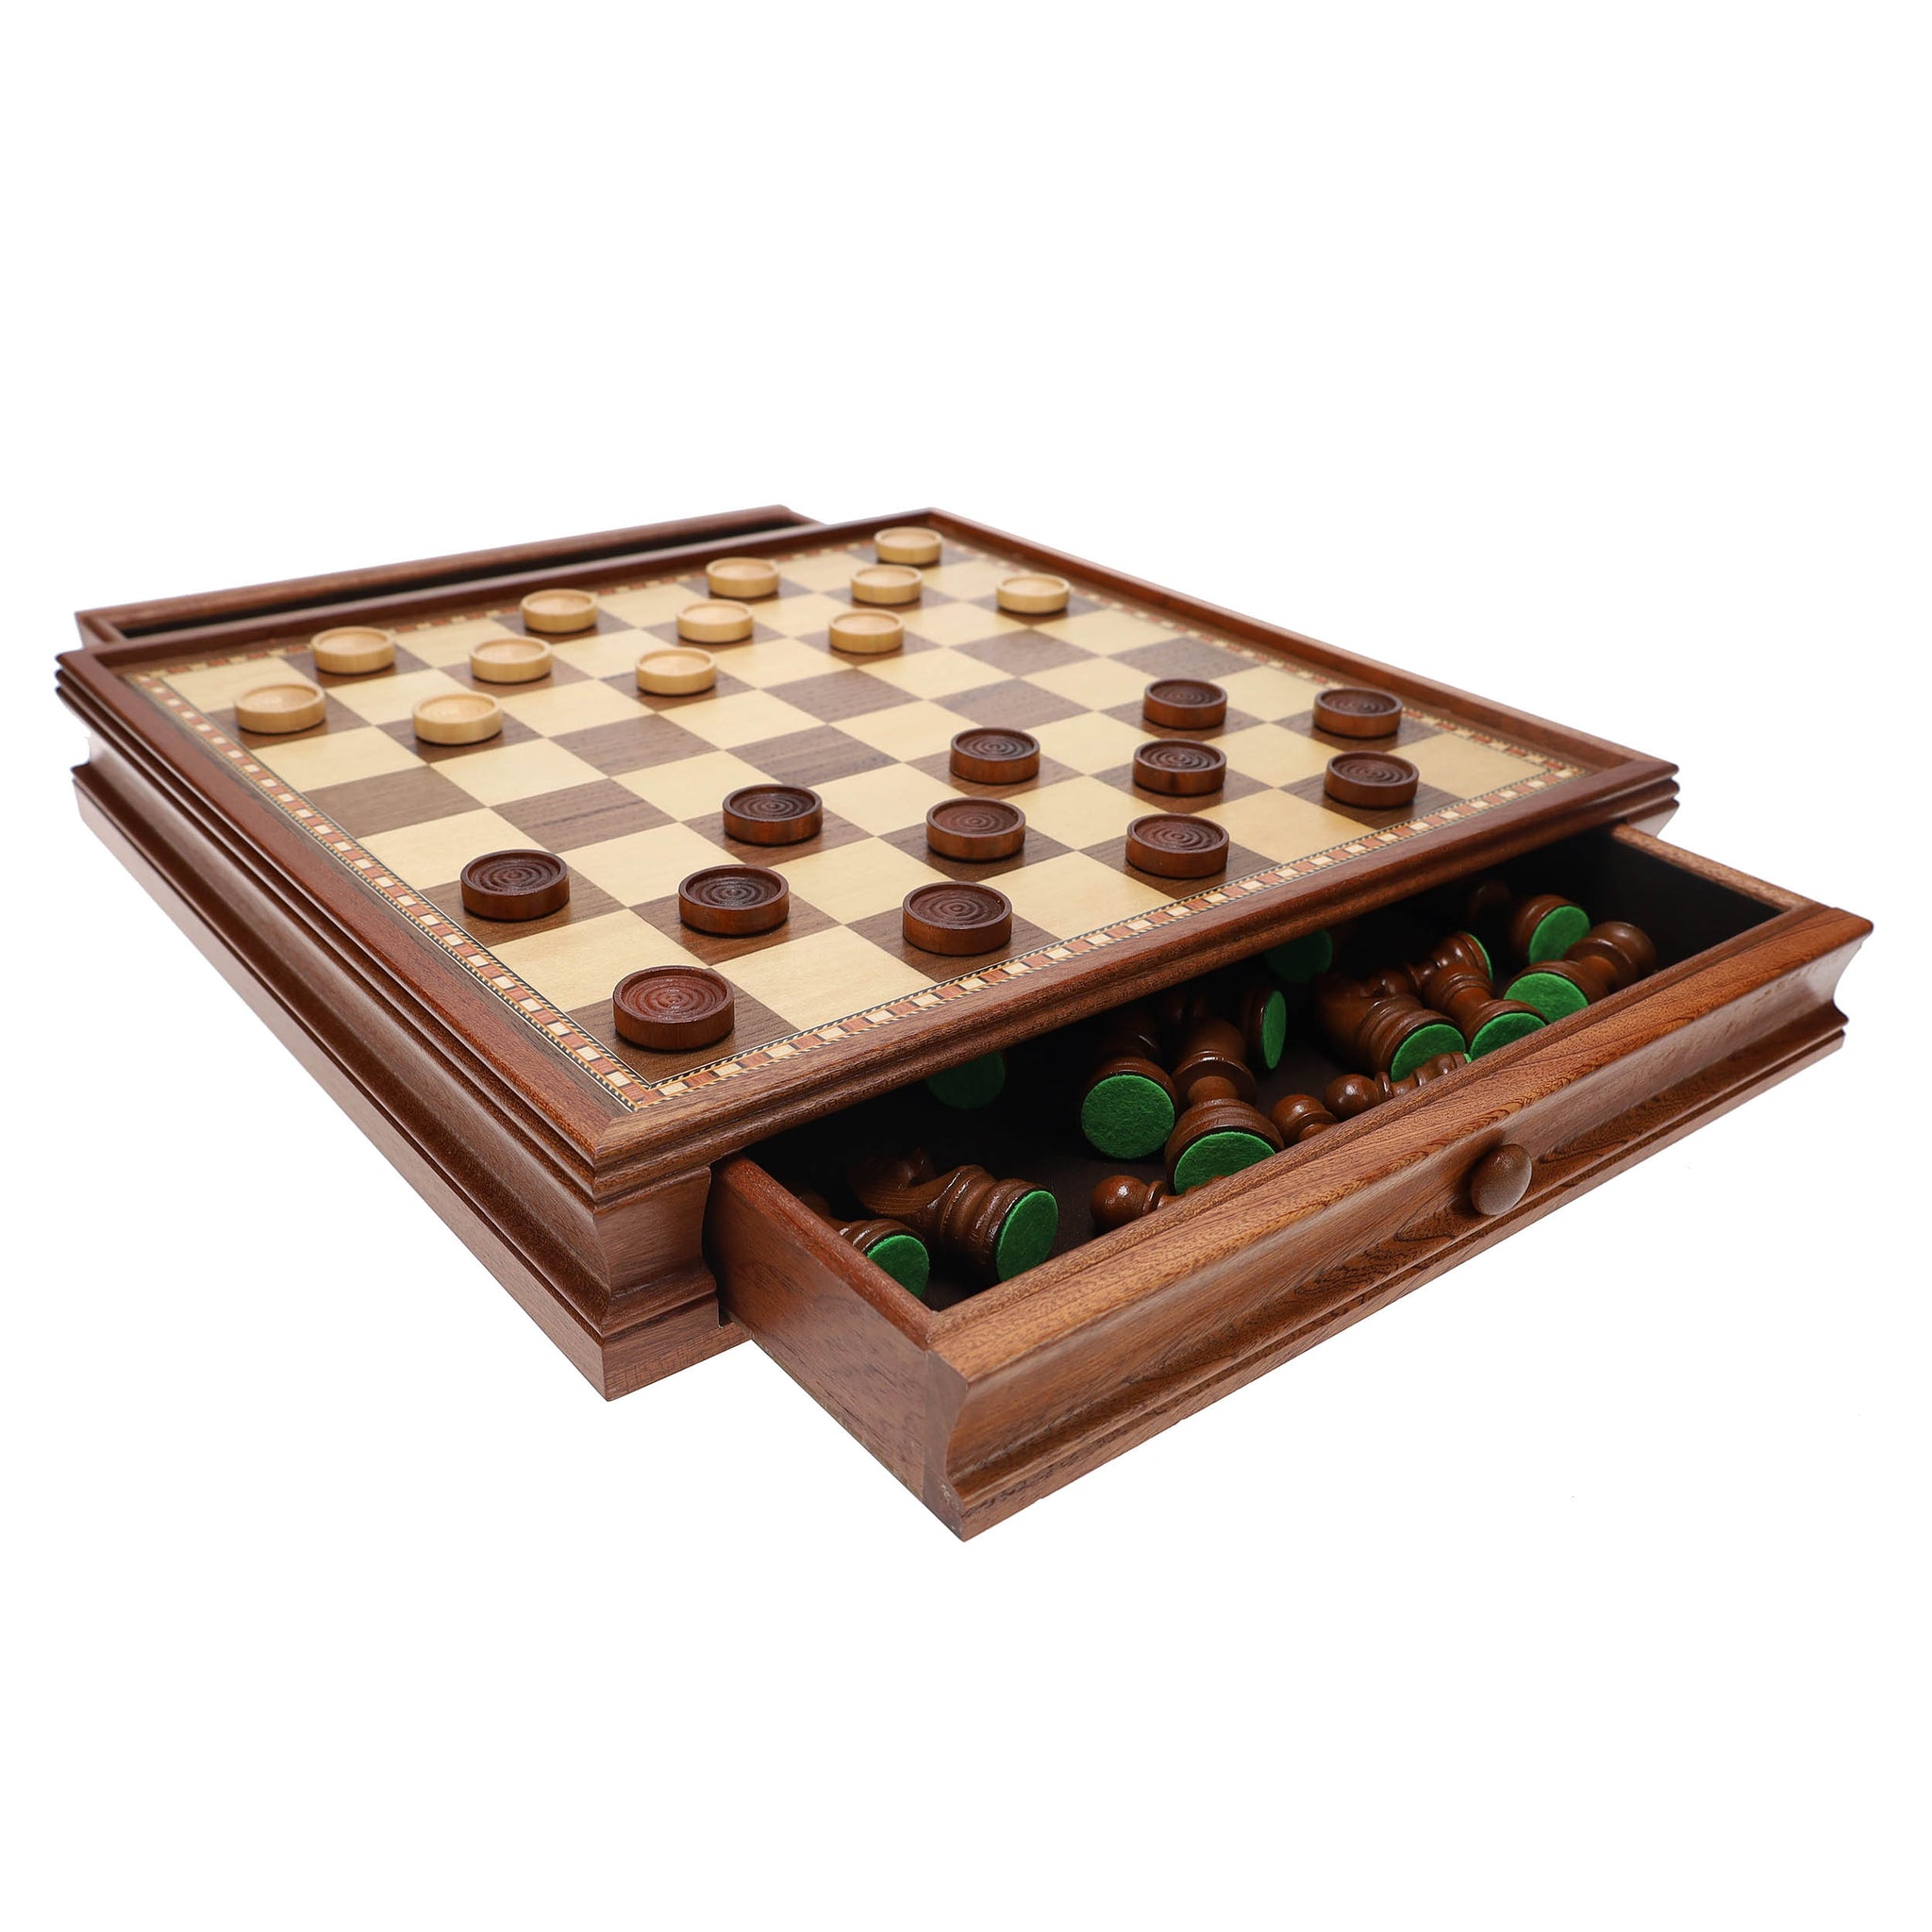 We Games French Staunton Wood Chessmen With 2.5 Inch King : Target